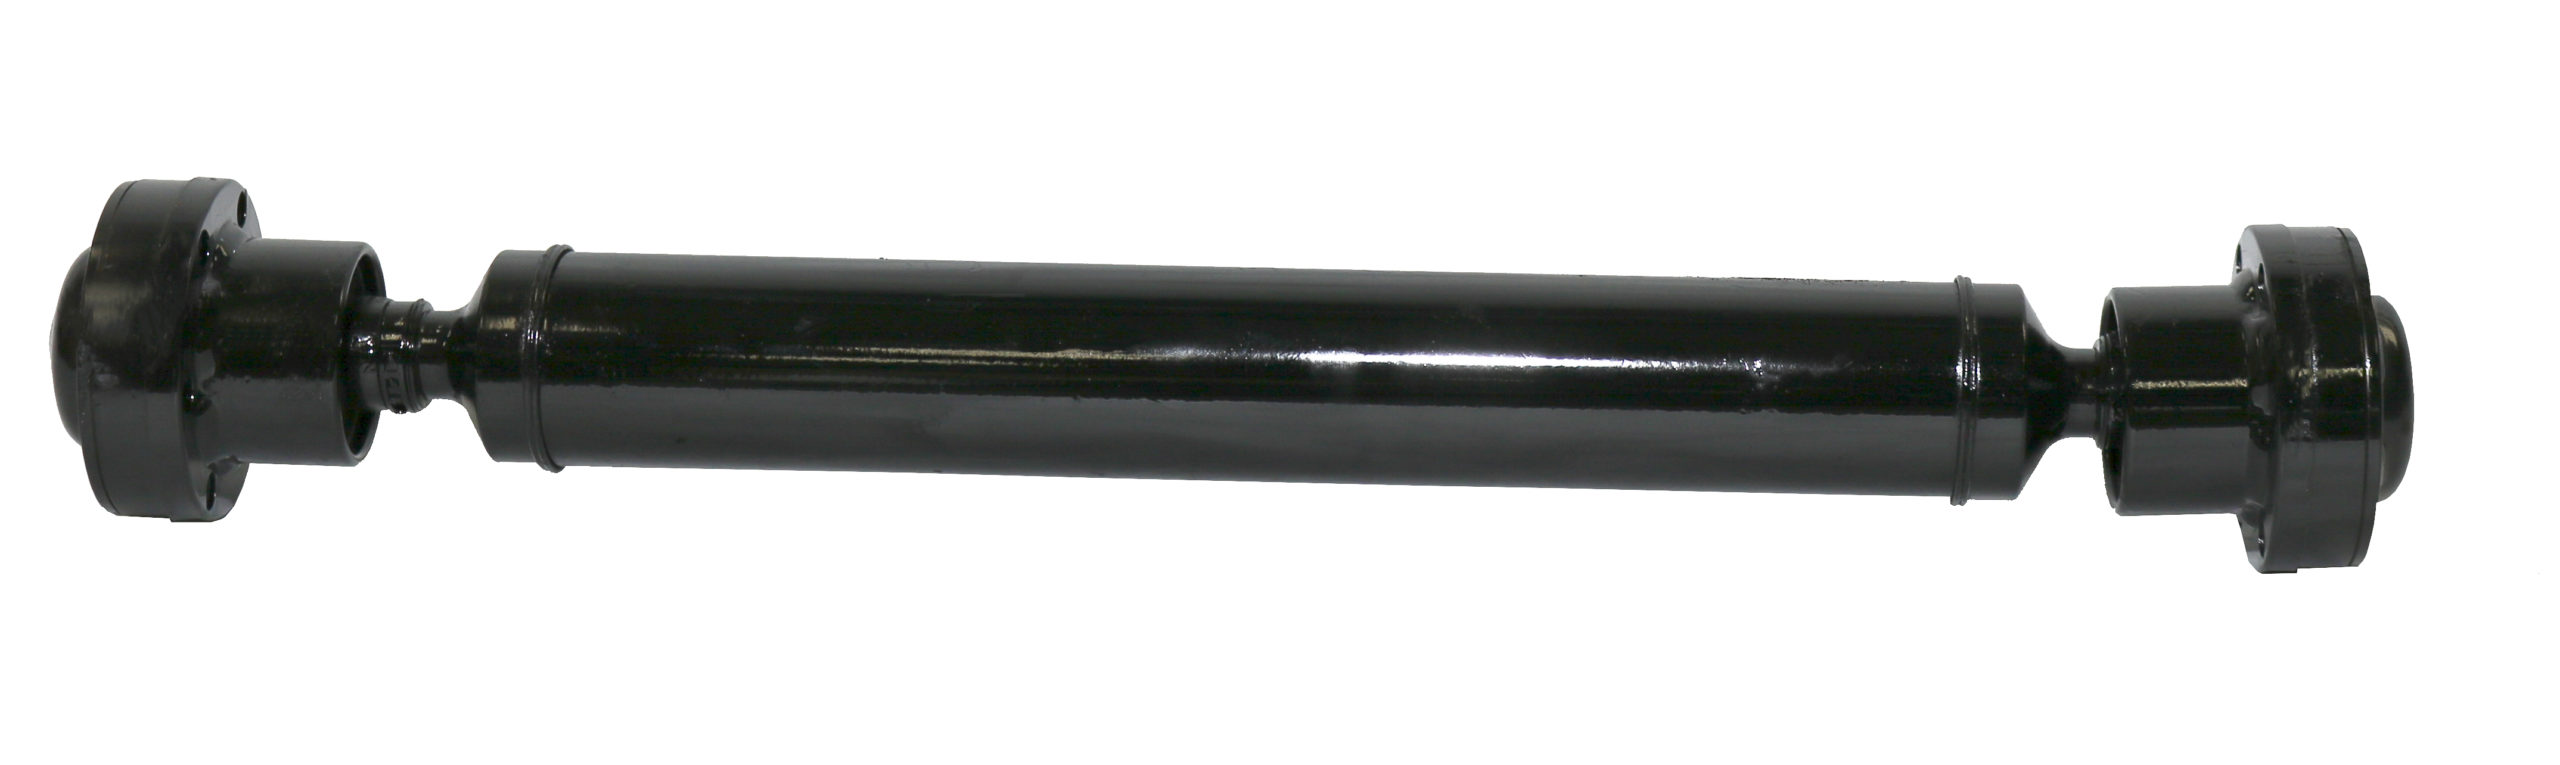 Front driveshaft for Mercedes Benz ML and GLE classes.